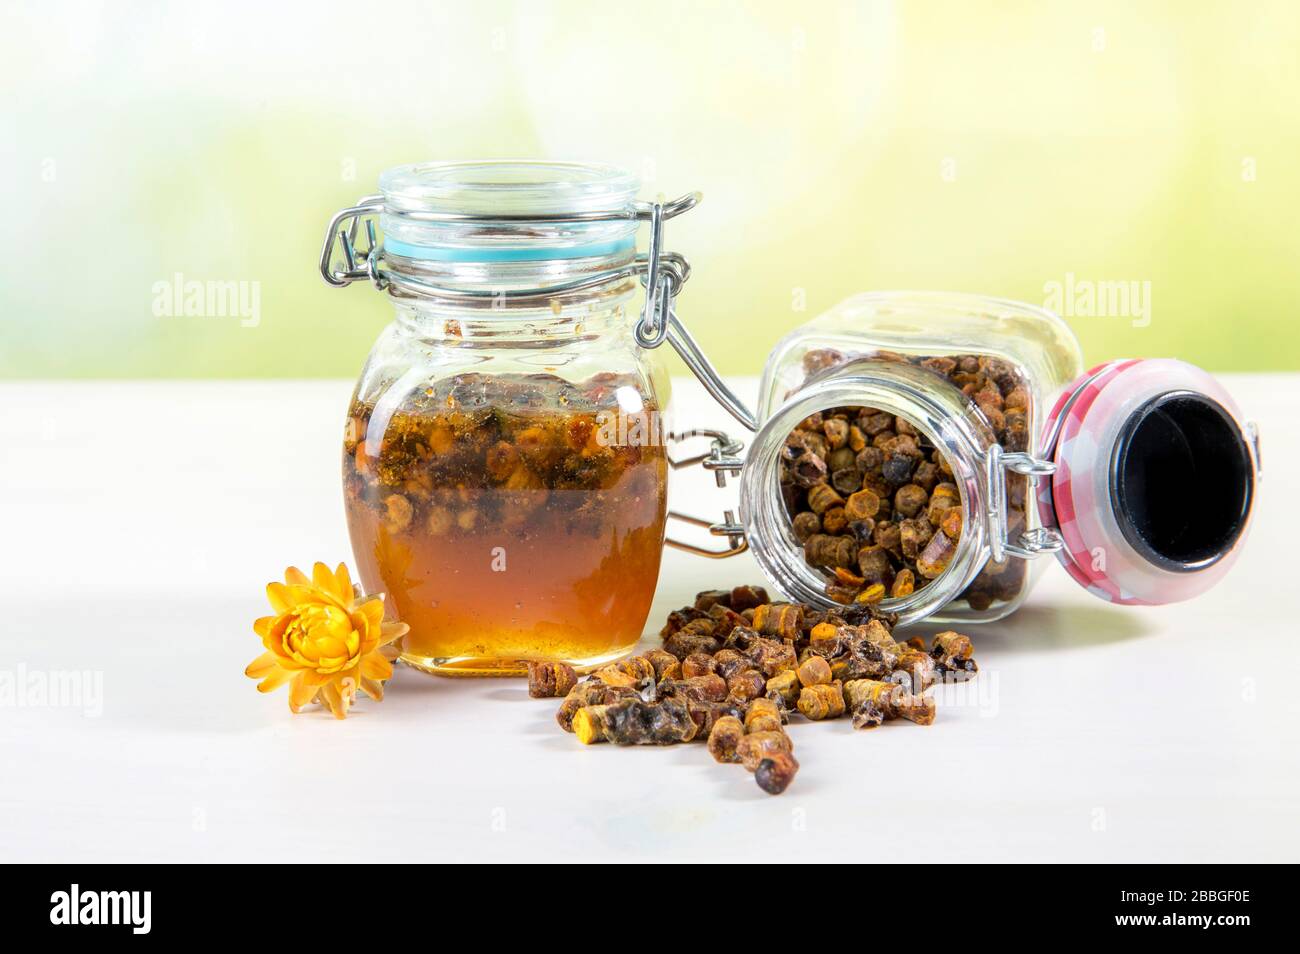 Alternative medicine mixture made with honey and bee bread ( fermented flower and plant pollen by honey bees) inside small glass jar. Stock Photo